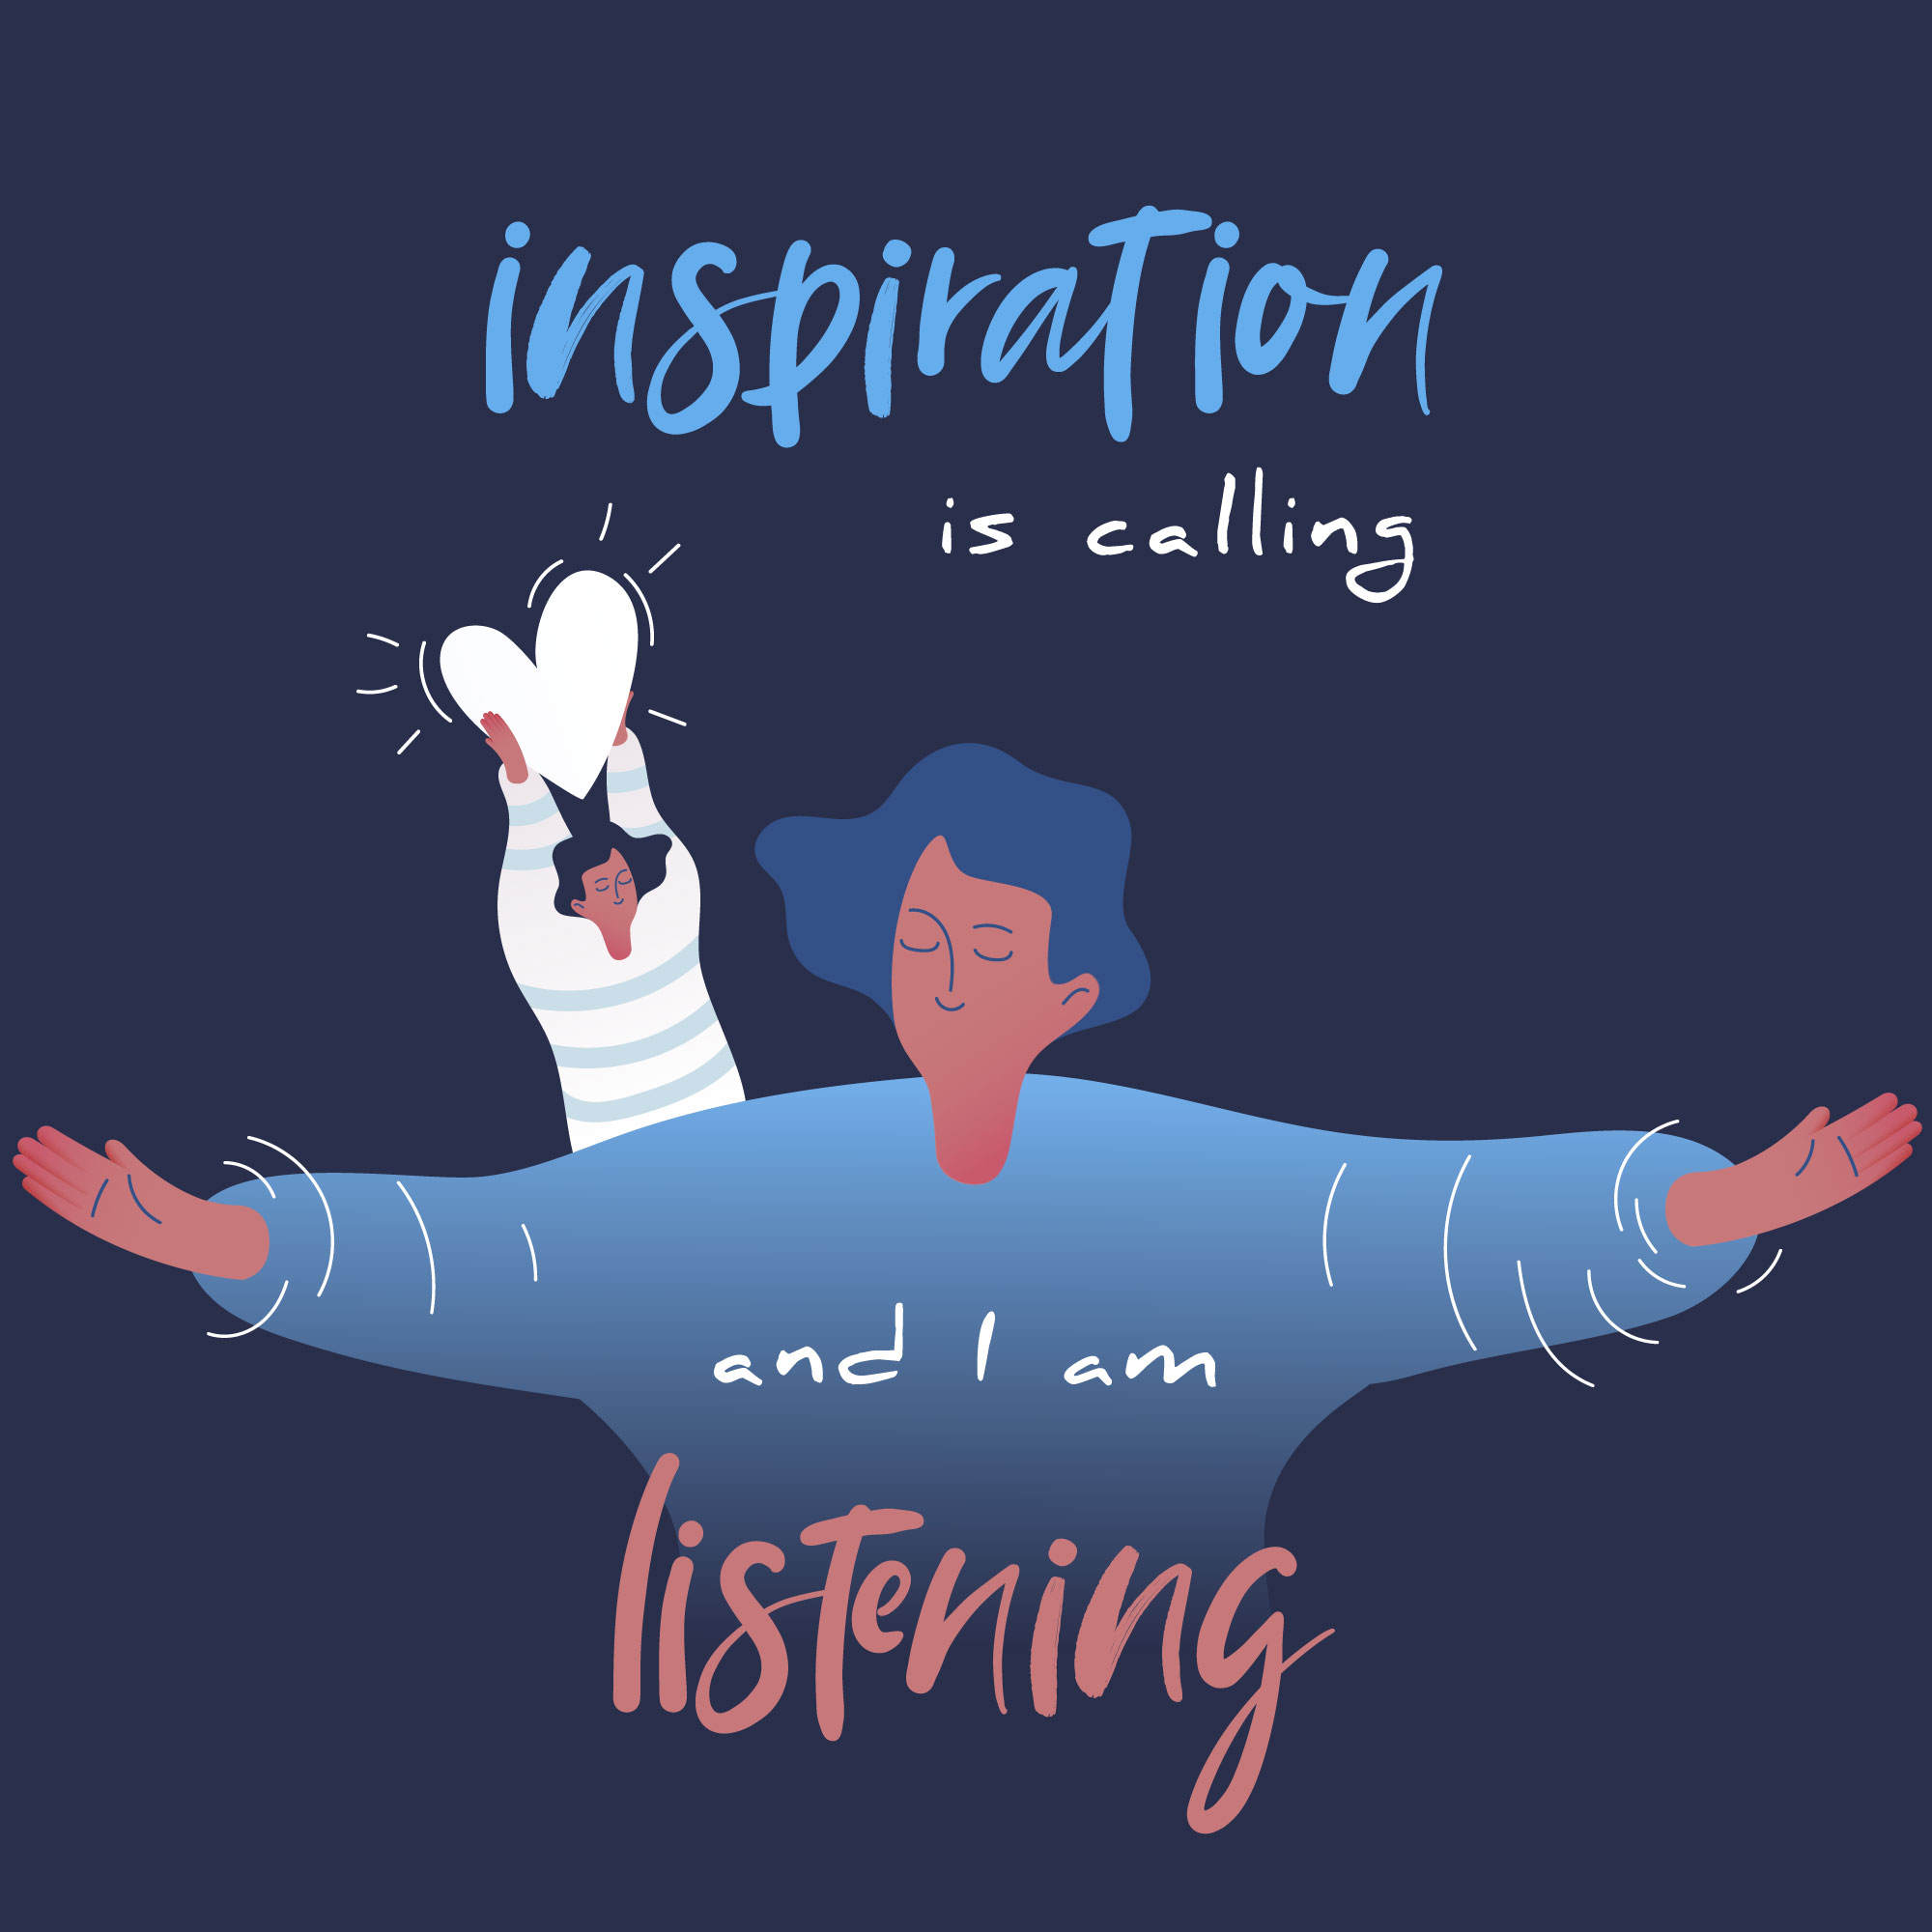 Inspiration is calling, and I am listening.